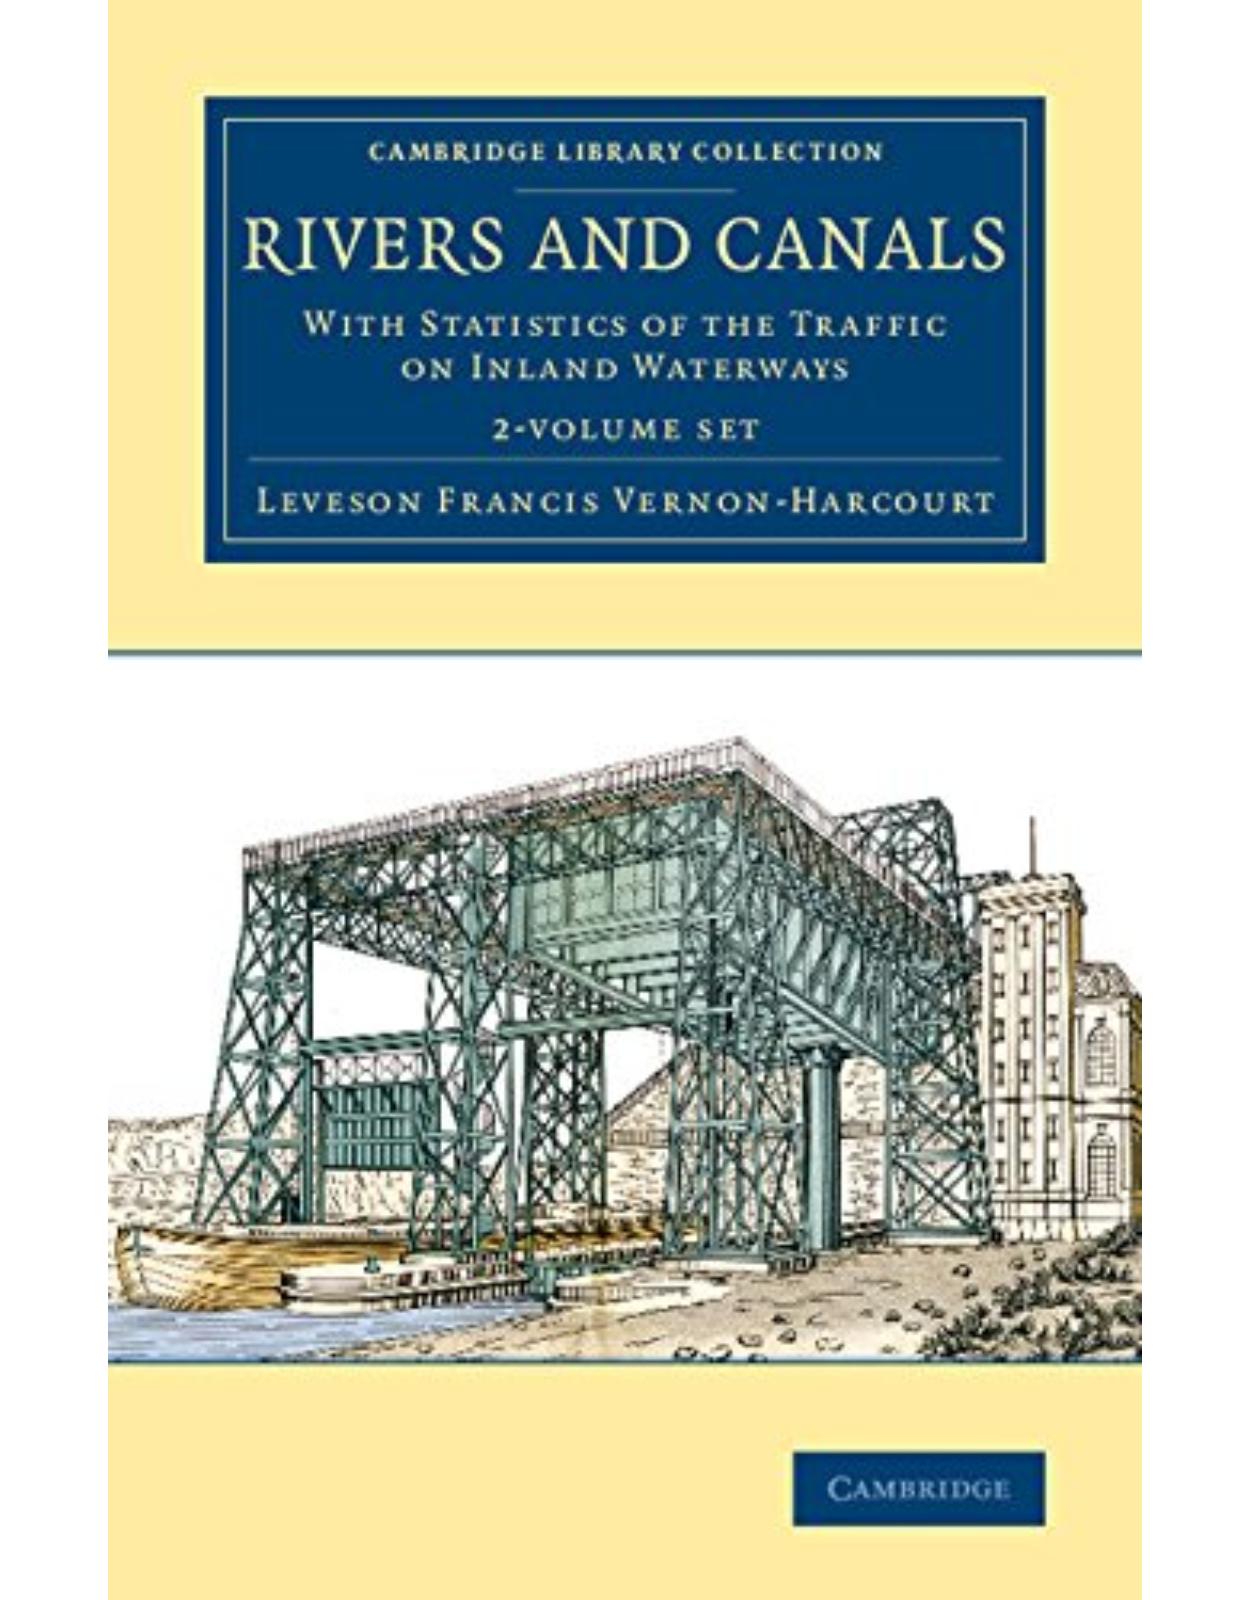 Rivers and Canals 2 Volume Set: With Statistics of the Traffic on Inland Waterways (Cambridge Library Collection - Technology)